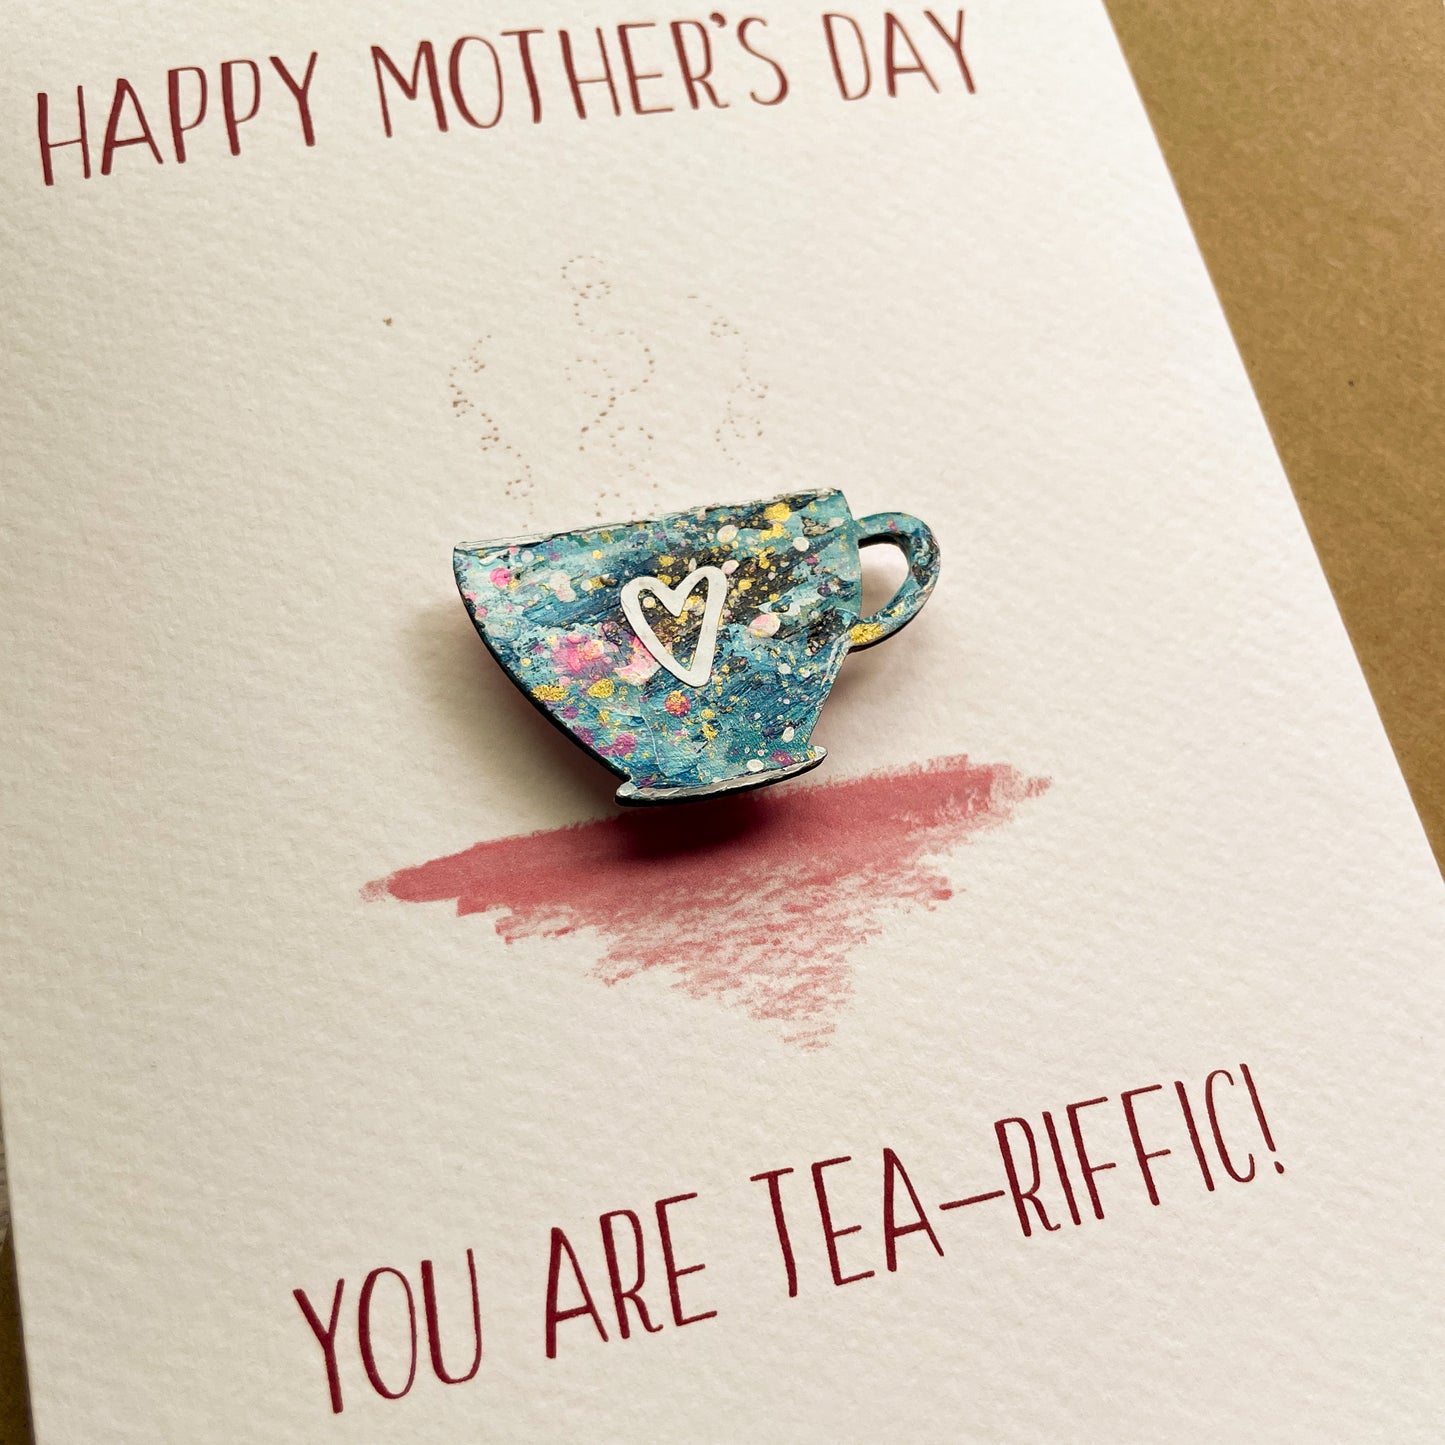 Magnet Keepsake & Mother's Day Card - You're Tea-riffic!